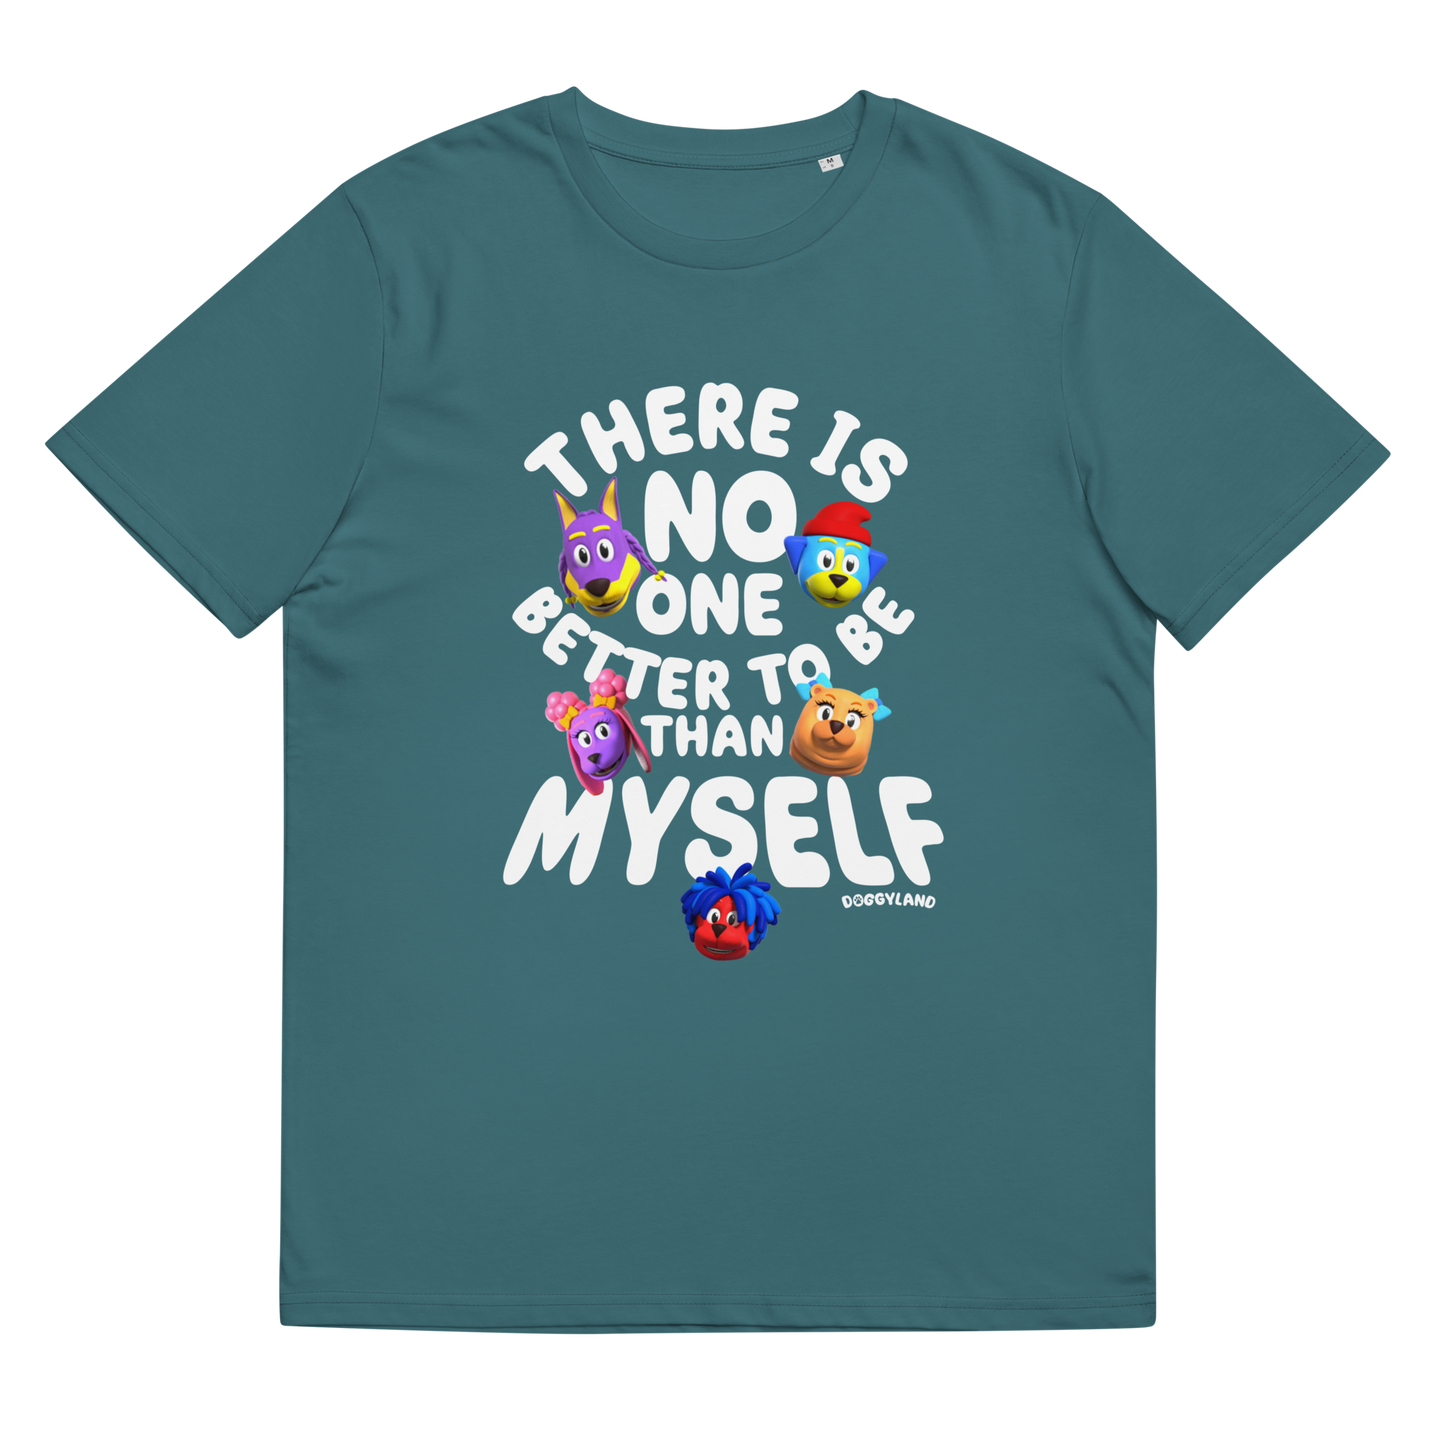 Adult Doggyland "There Is No One Better To Be Than Myself" Shirt